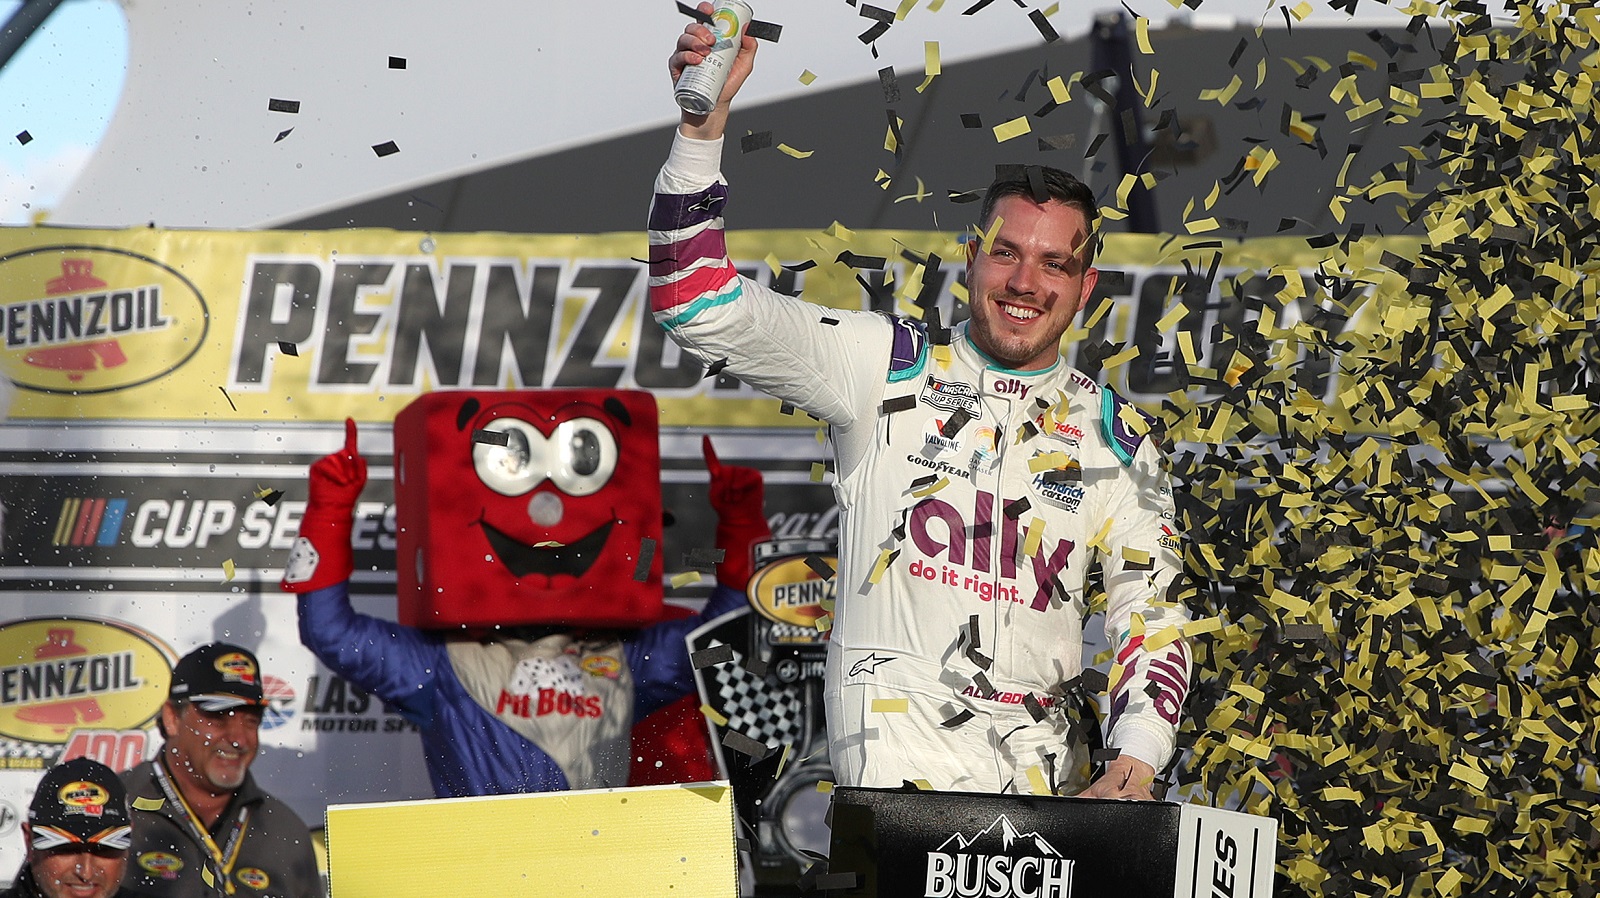 Alex Bowman, driver of the No. 48 Chevrolet, celebrates after winning the NASCAR Cup Series Pennzoil 400 at Las Vegas Motor Speedway on March 6, 2022. | Meg Oliphant/Getty Images